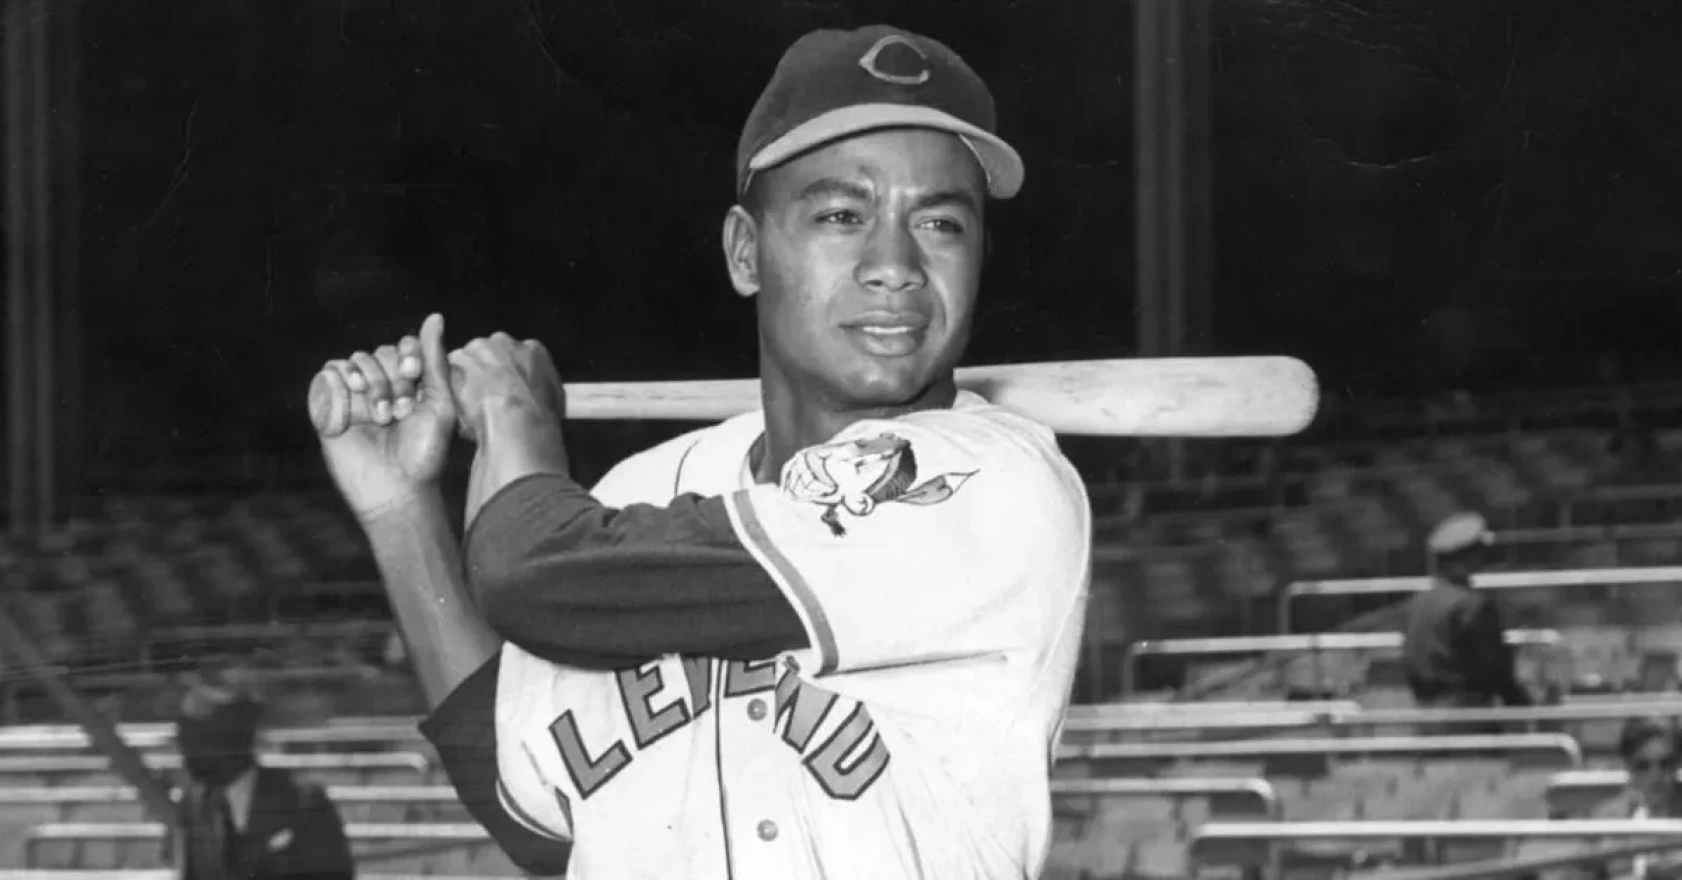 Larry Doby was inducted into the Baseball Hall of Fame in 1998